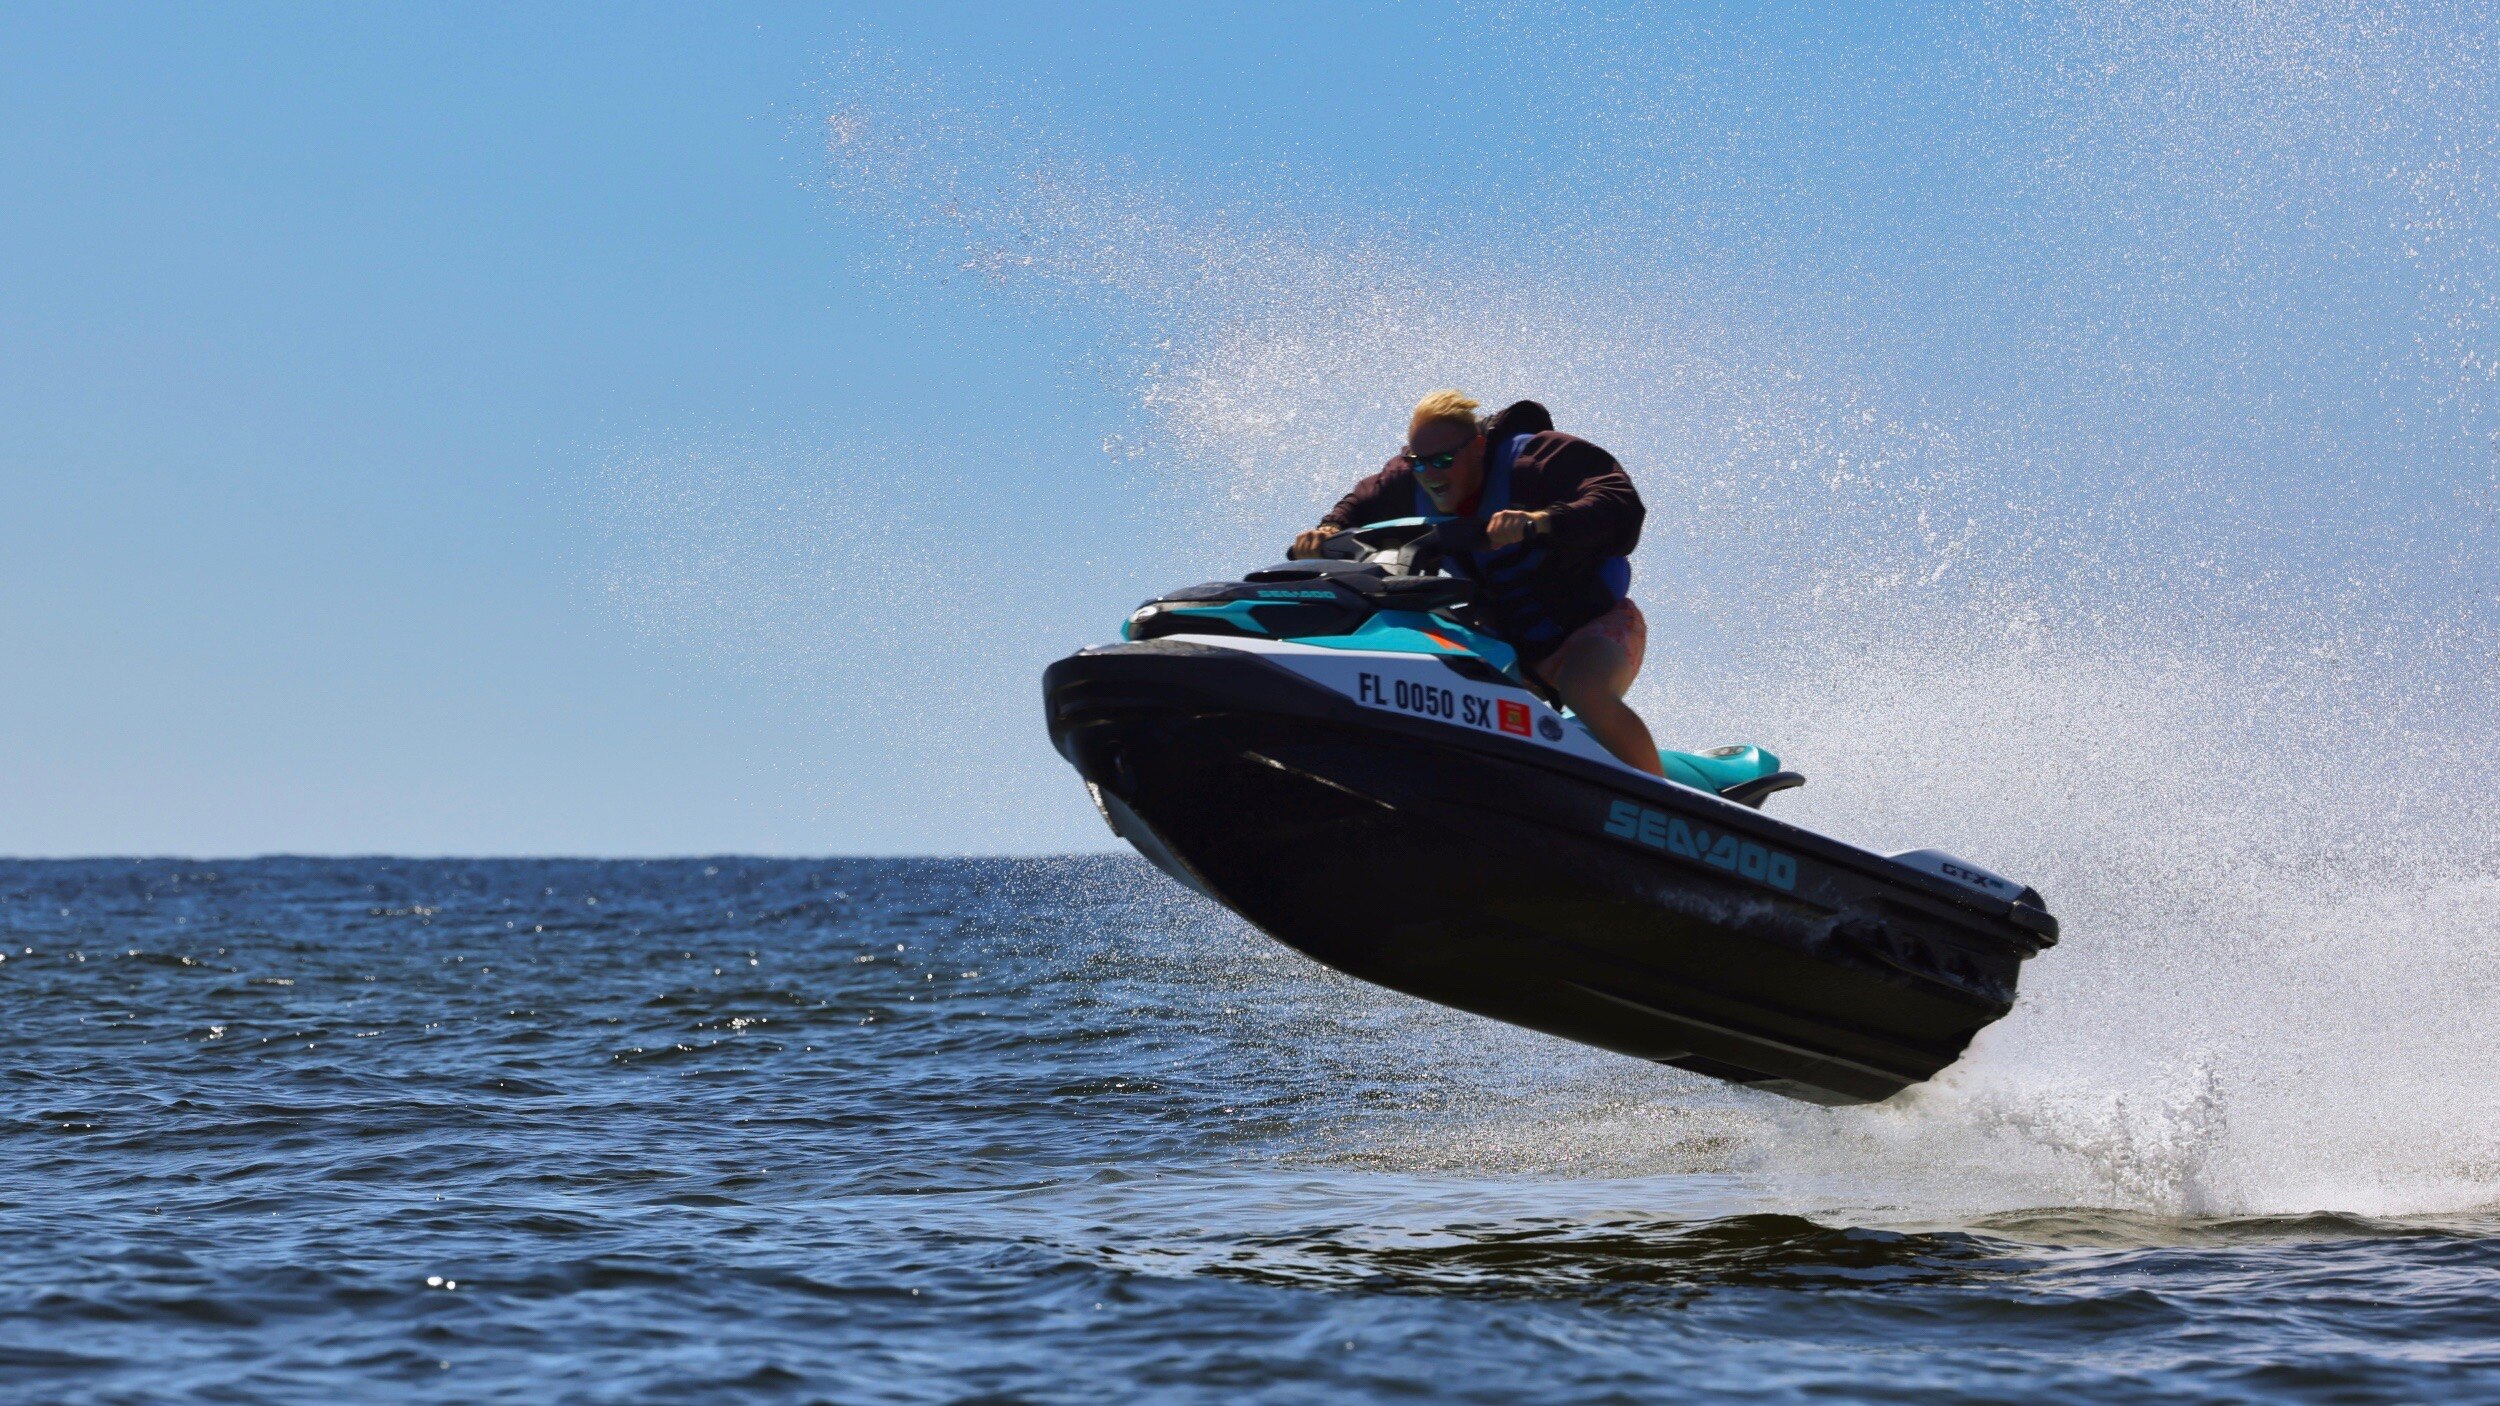 A man jumping in the air with a Sea-Doo